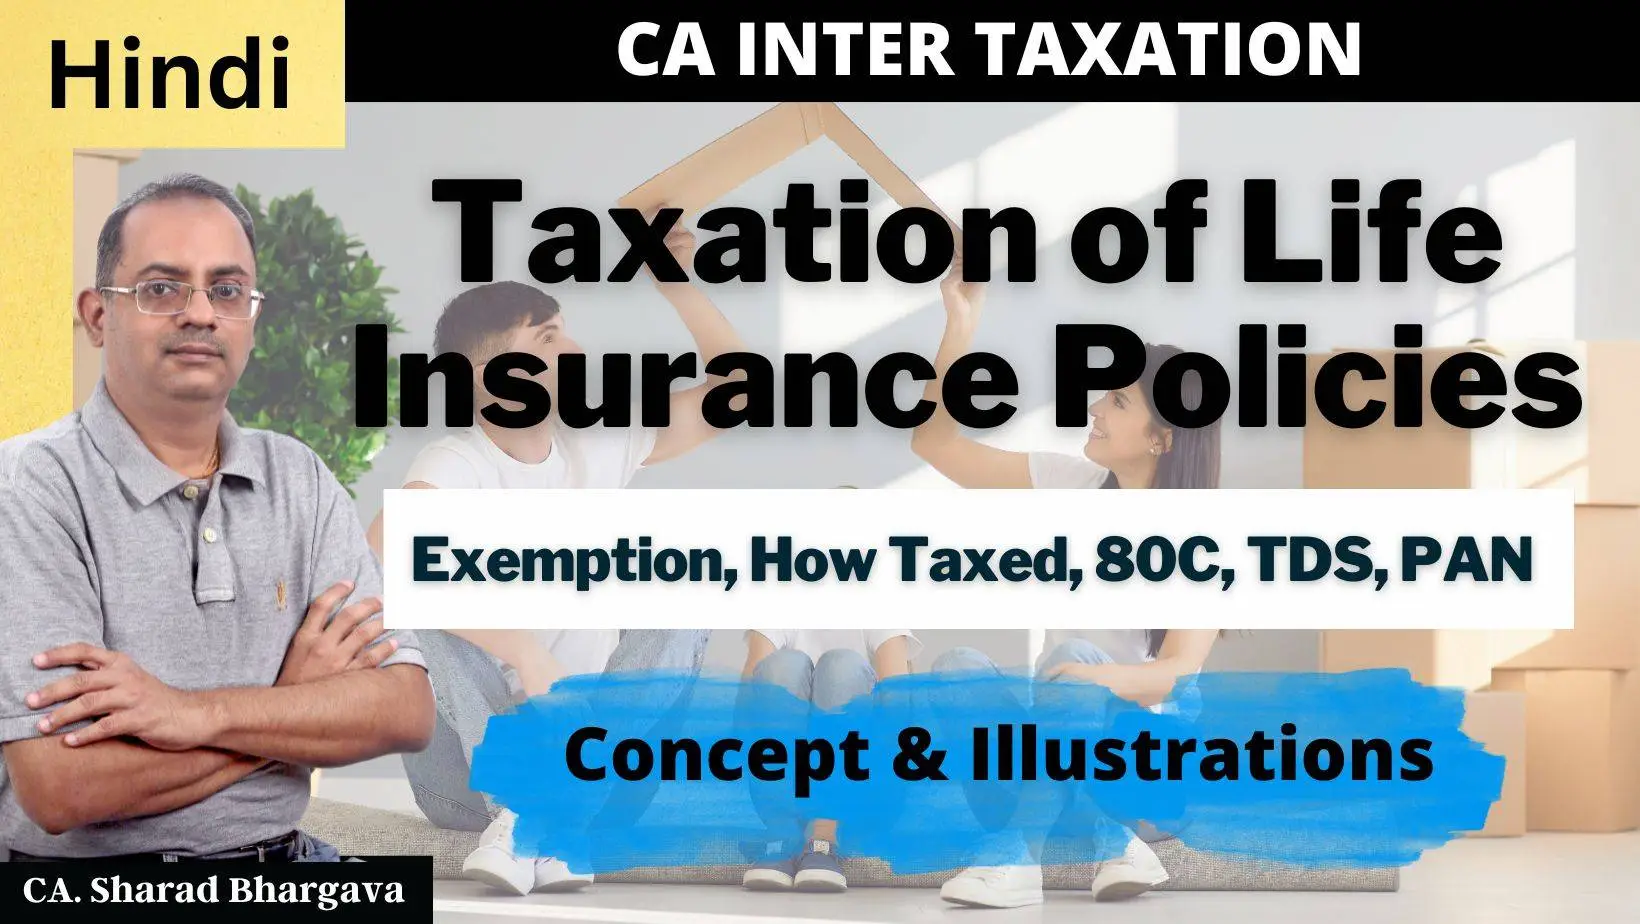 (Hindi) / Know all about taxation of Life Insurance Policies / CA. Sharad Bhargava